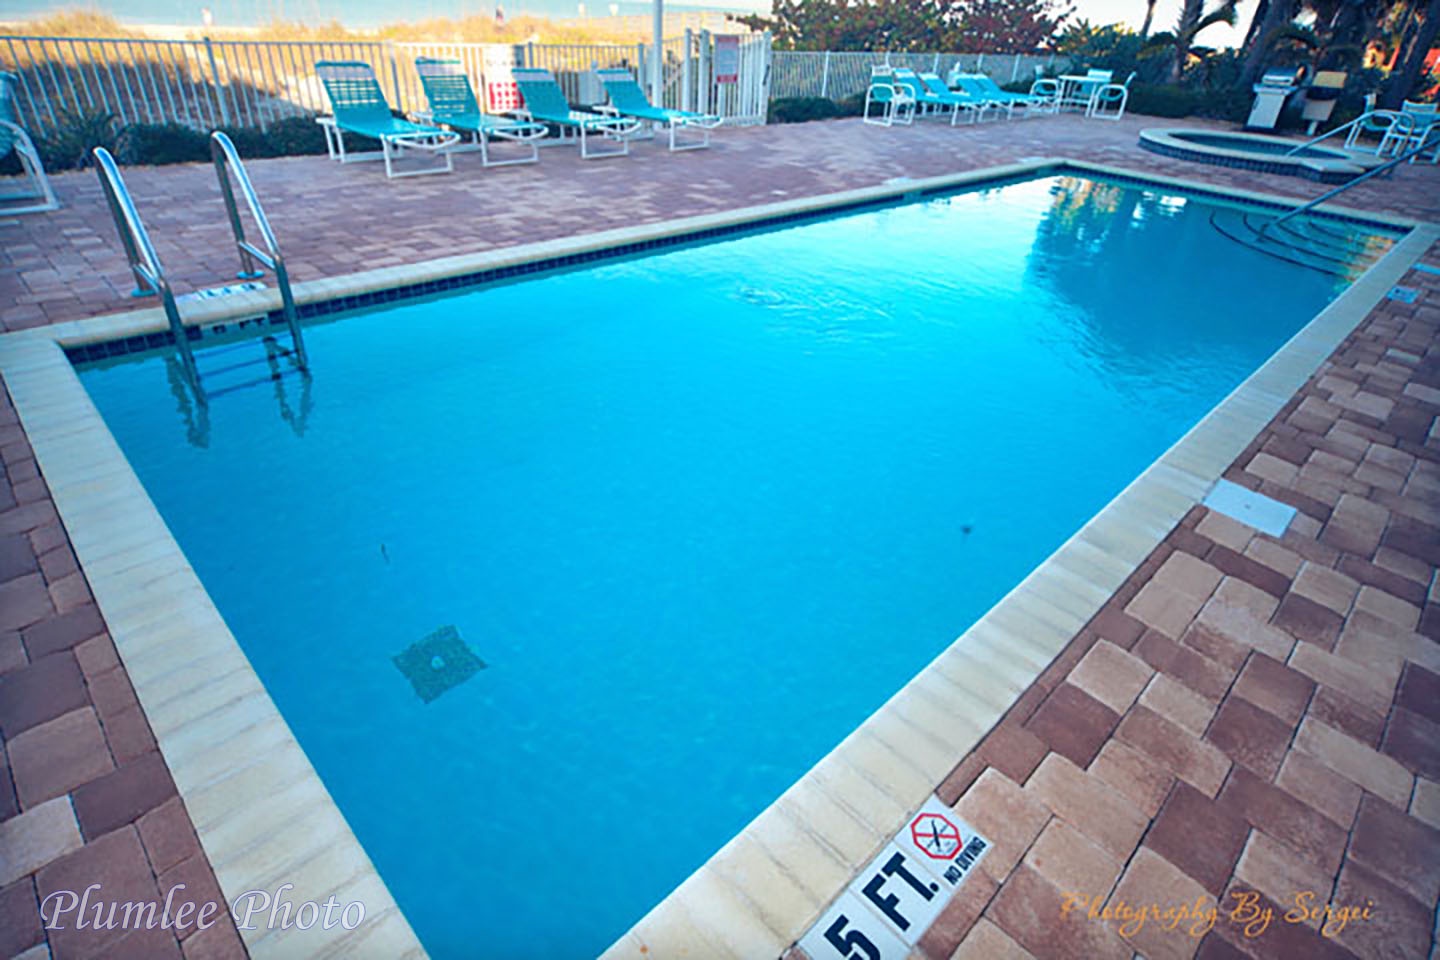 The pool at Oceanway condo complex.